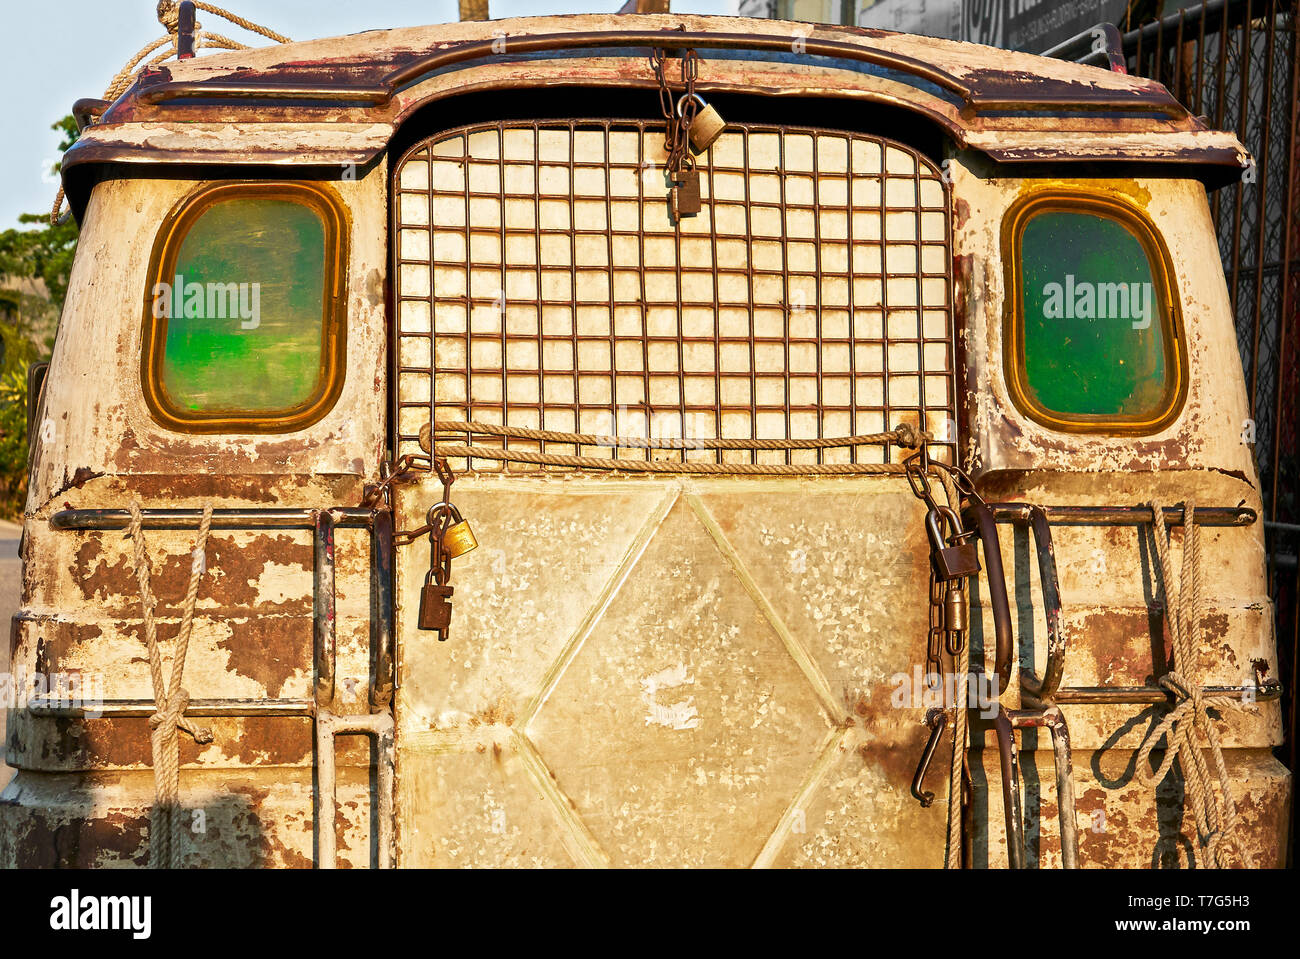 Rear of an old rusty jeepney type of delivery truck, with green windows several padlocks attached to it, parking in the streets of Iloilo, Philippines Stock Photo